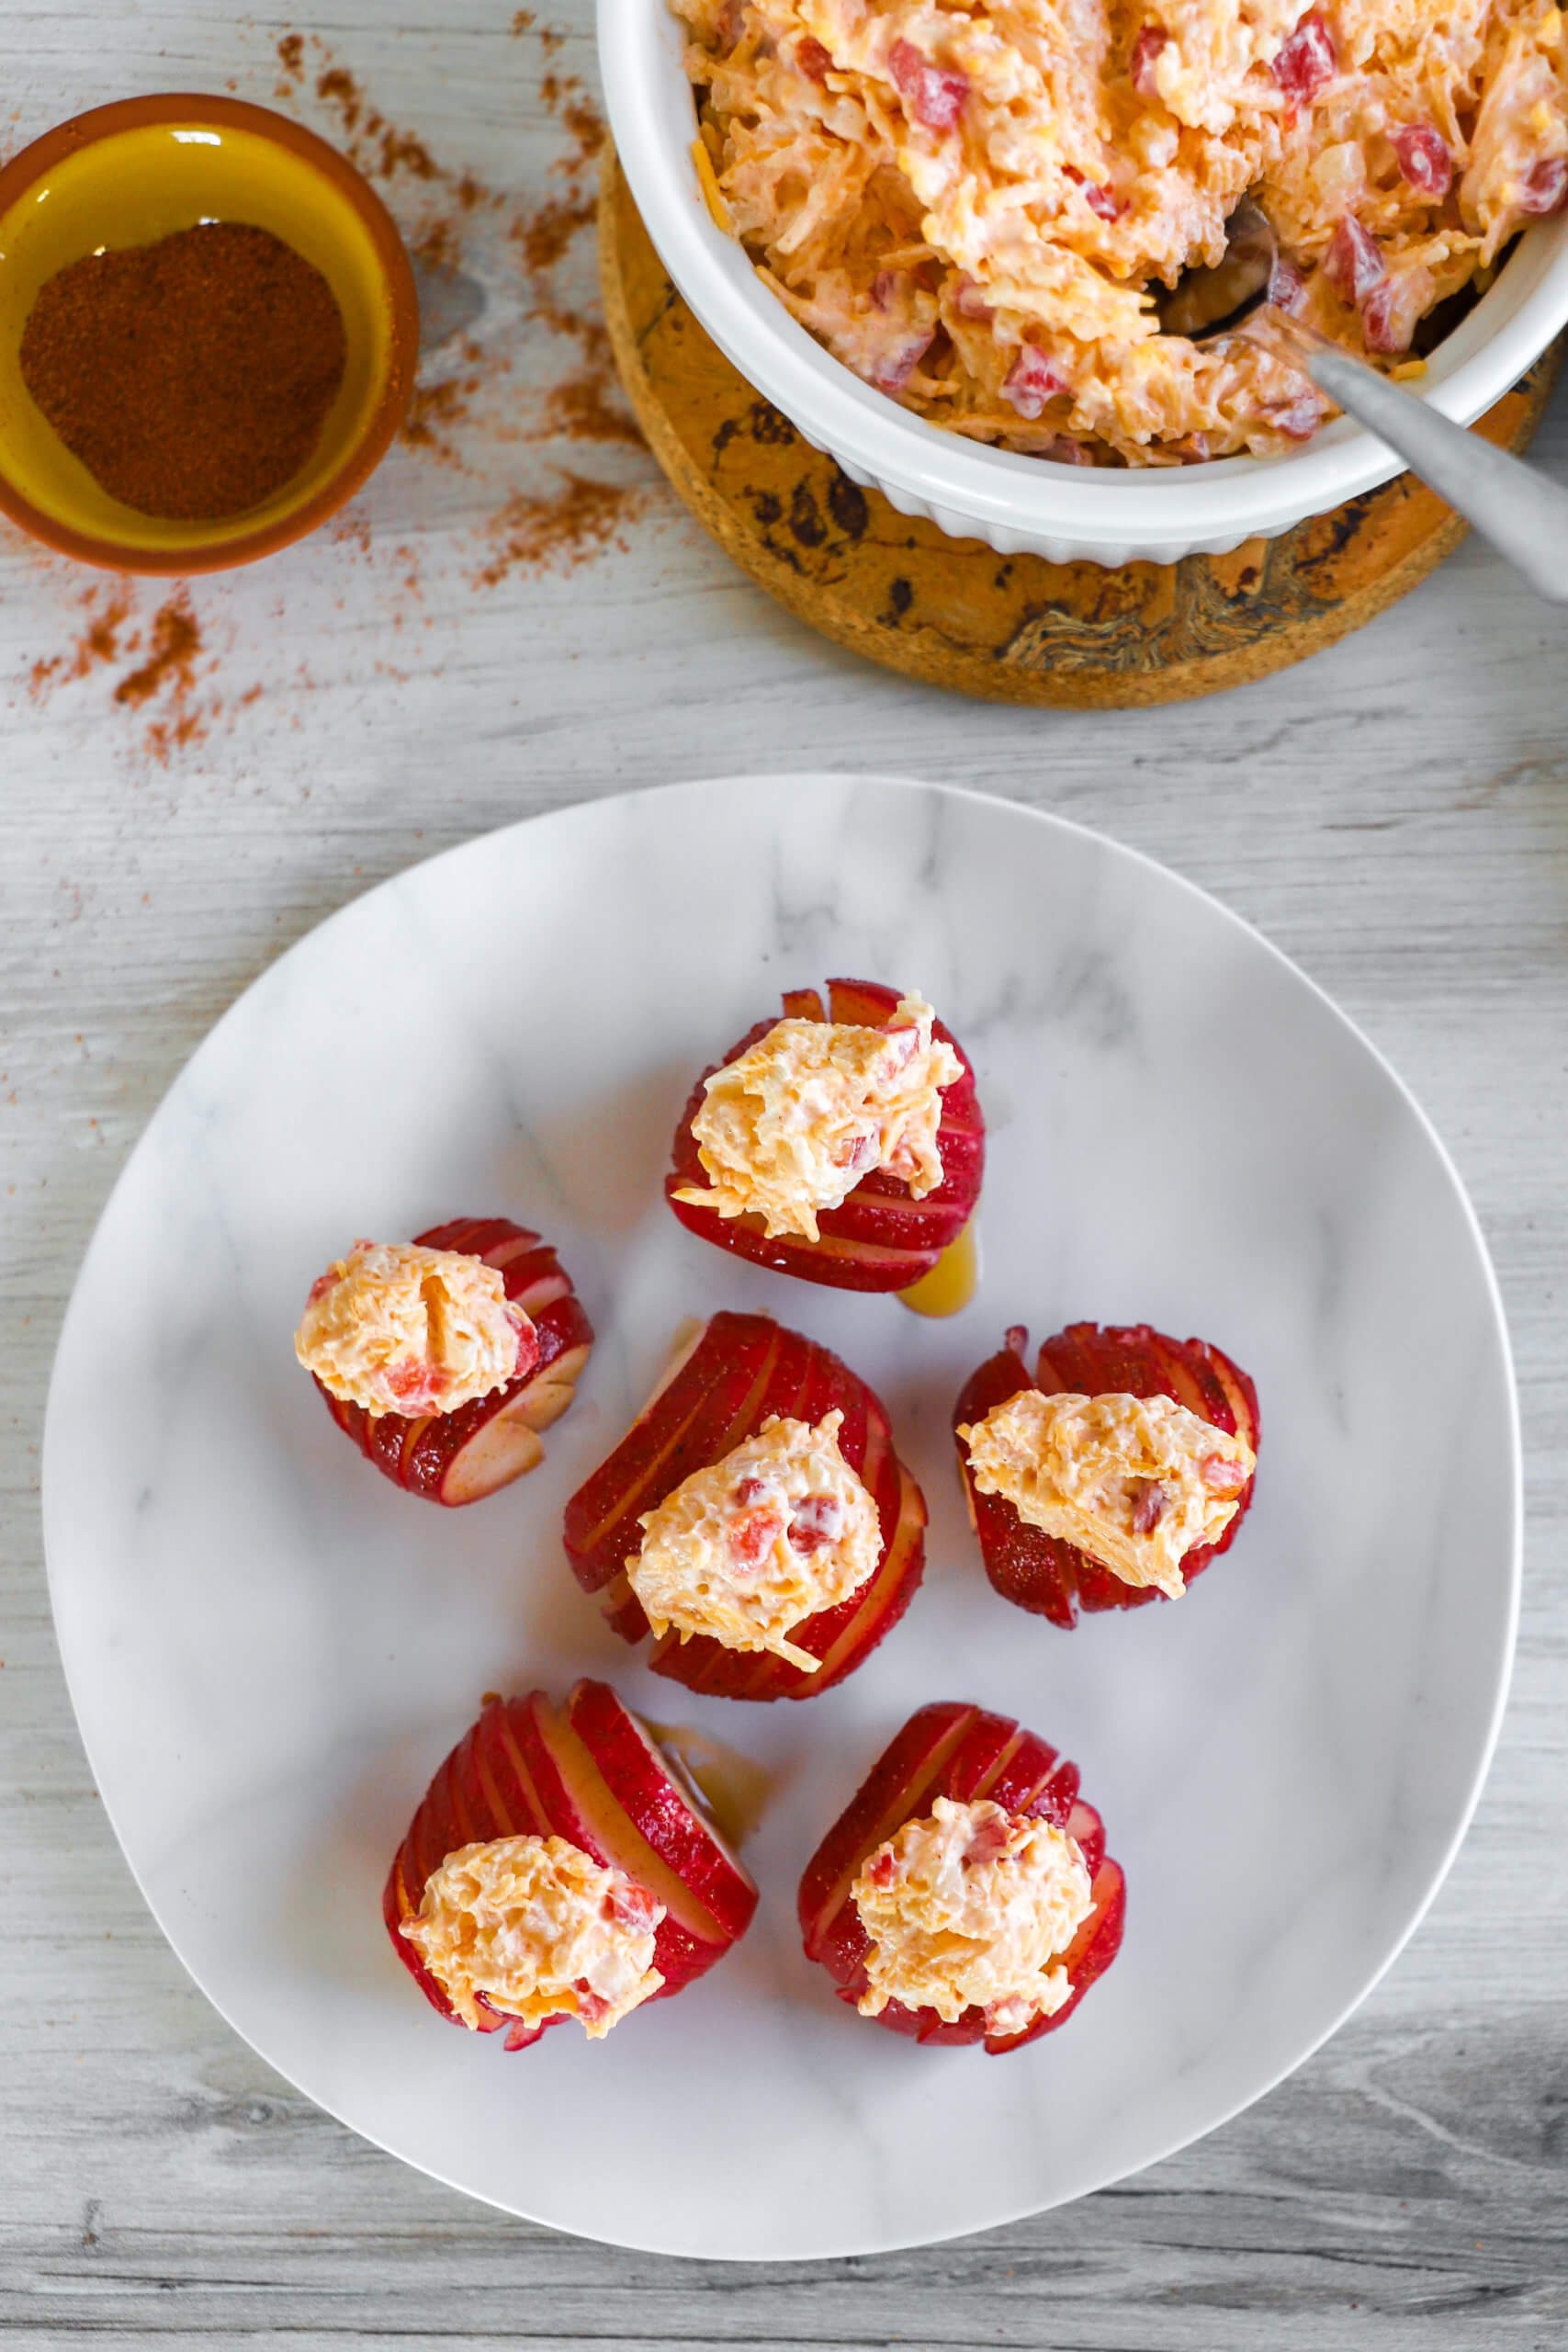 Cajun-Spiced Hasselback Radishes with Pimento Cheese